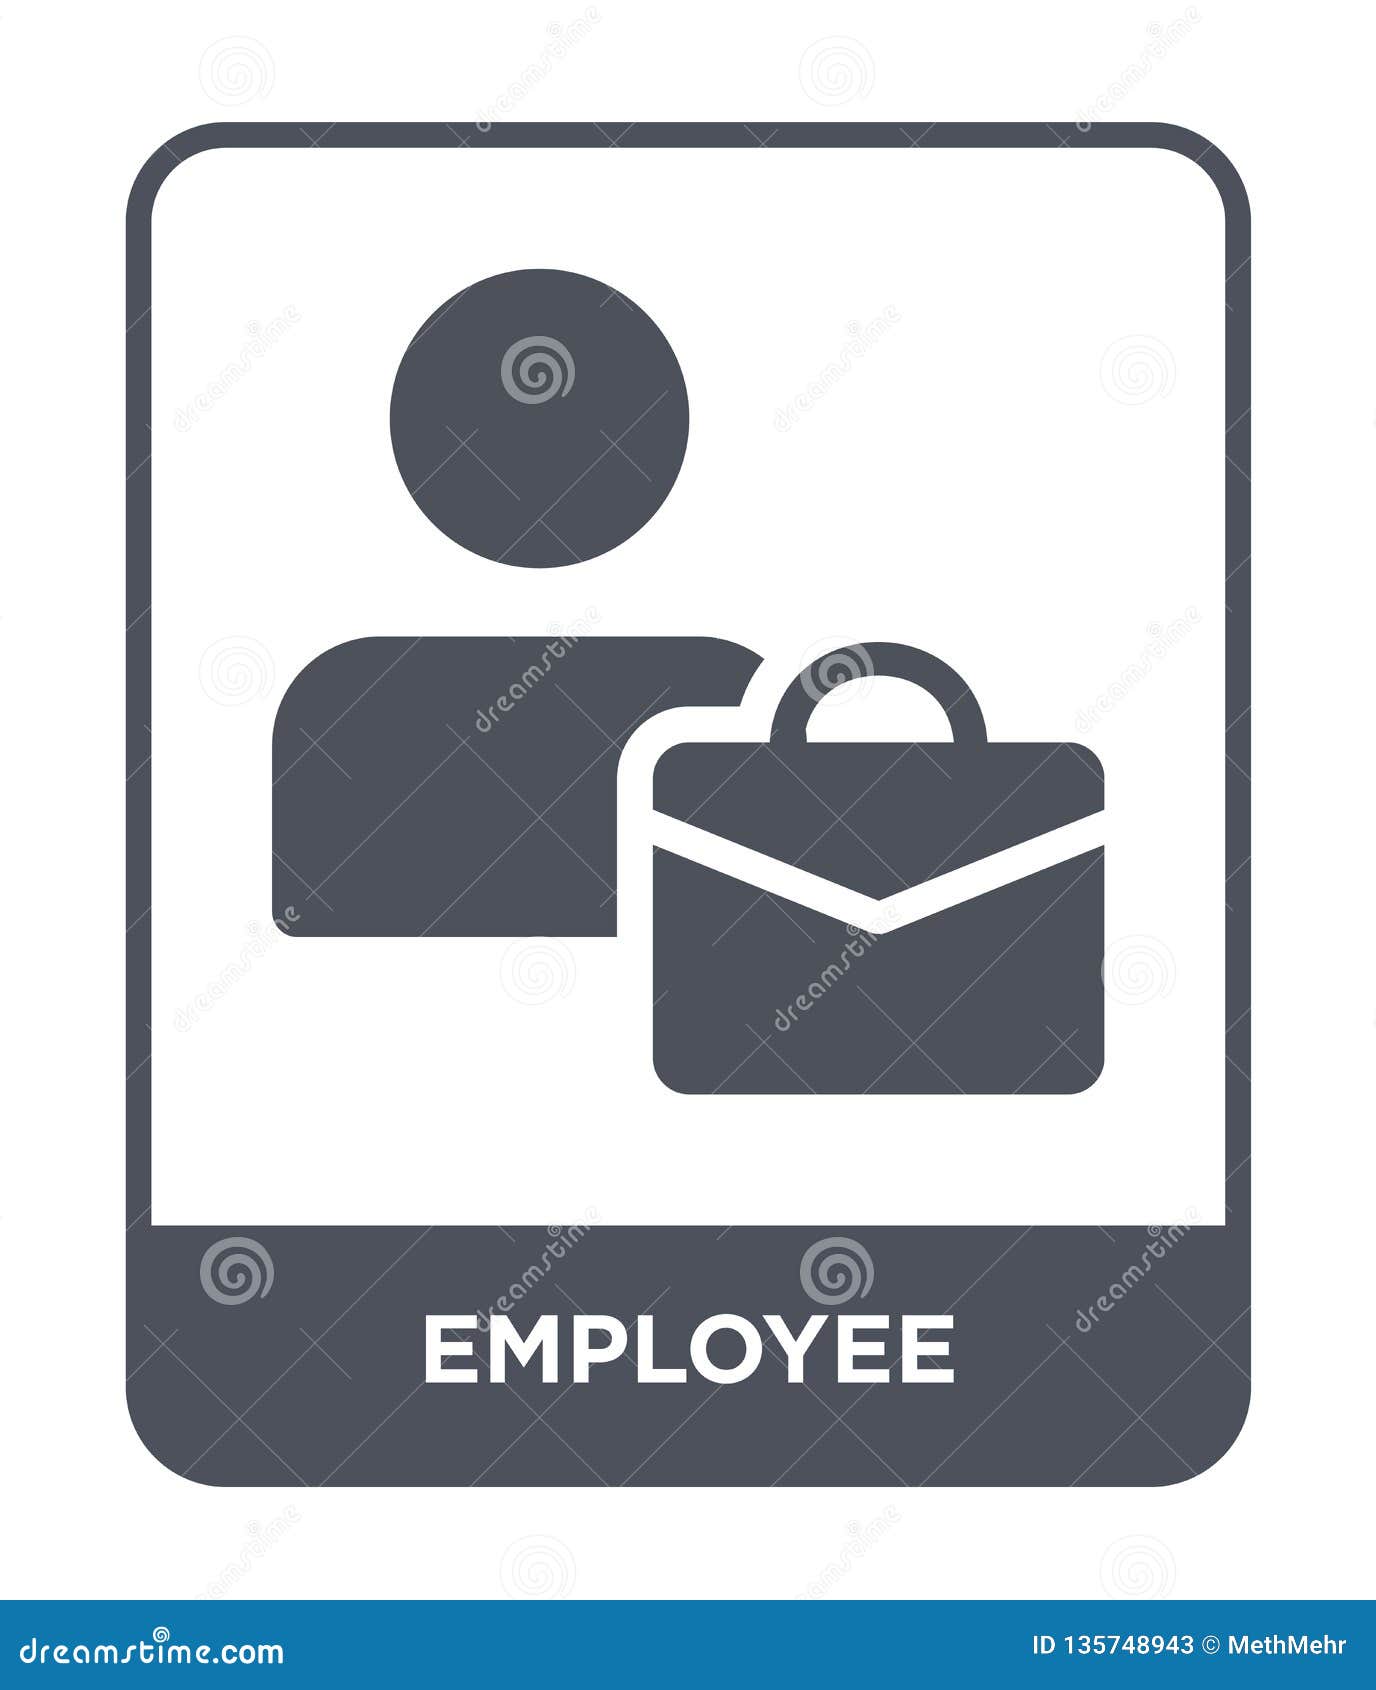 employee icon in trendy  style. employee icon  on white background. employee  icon simple and modern flat